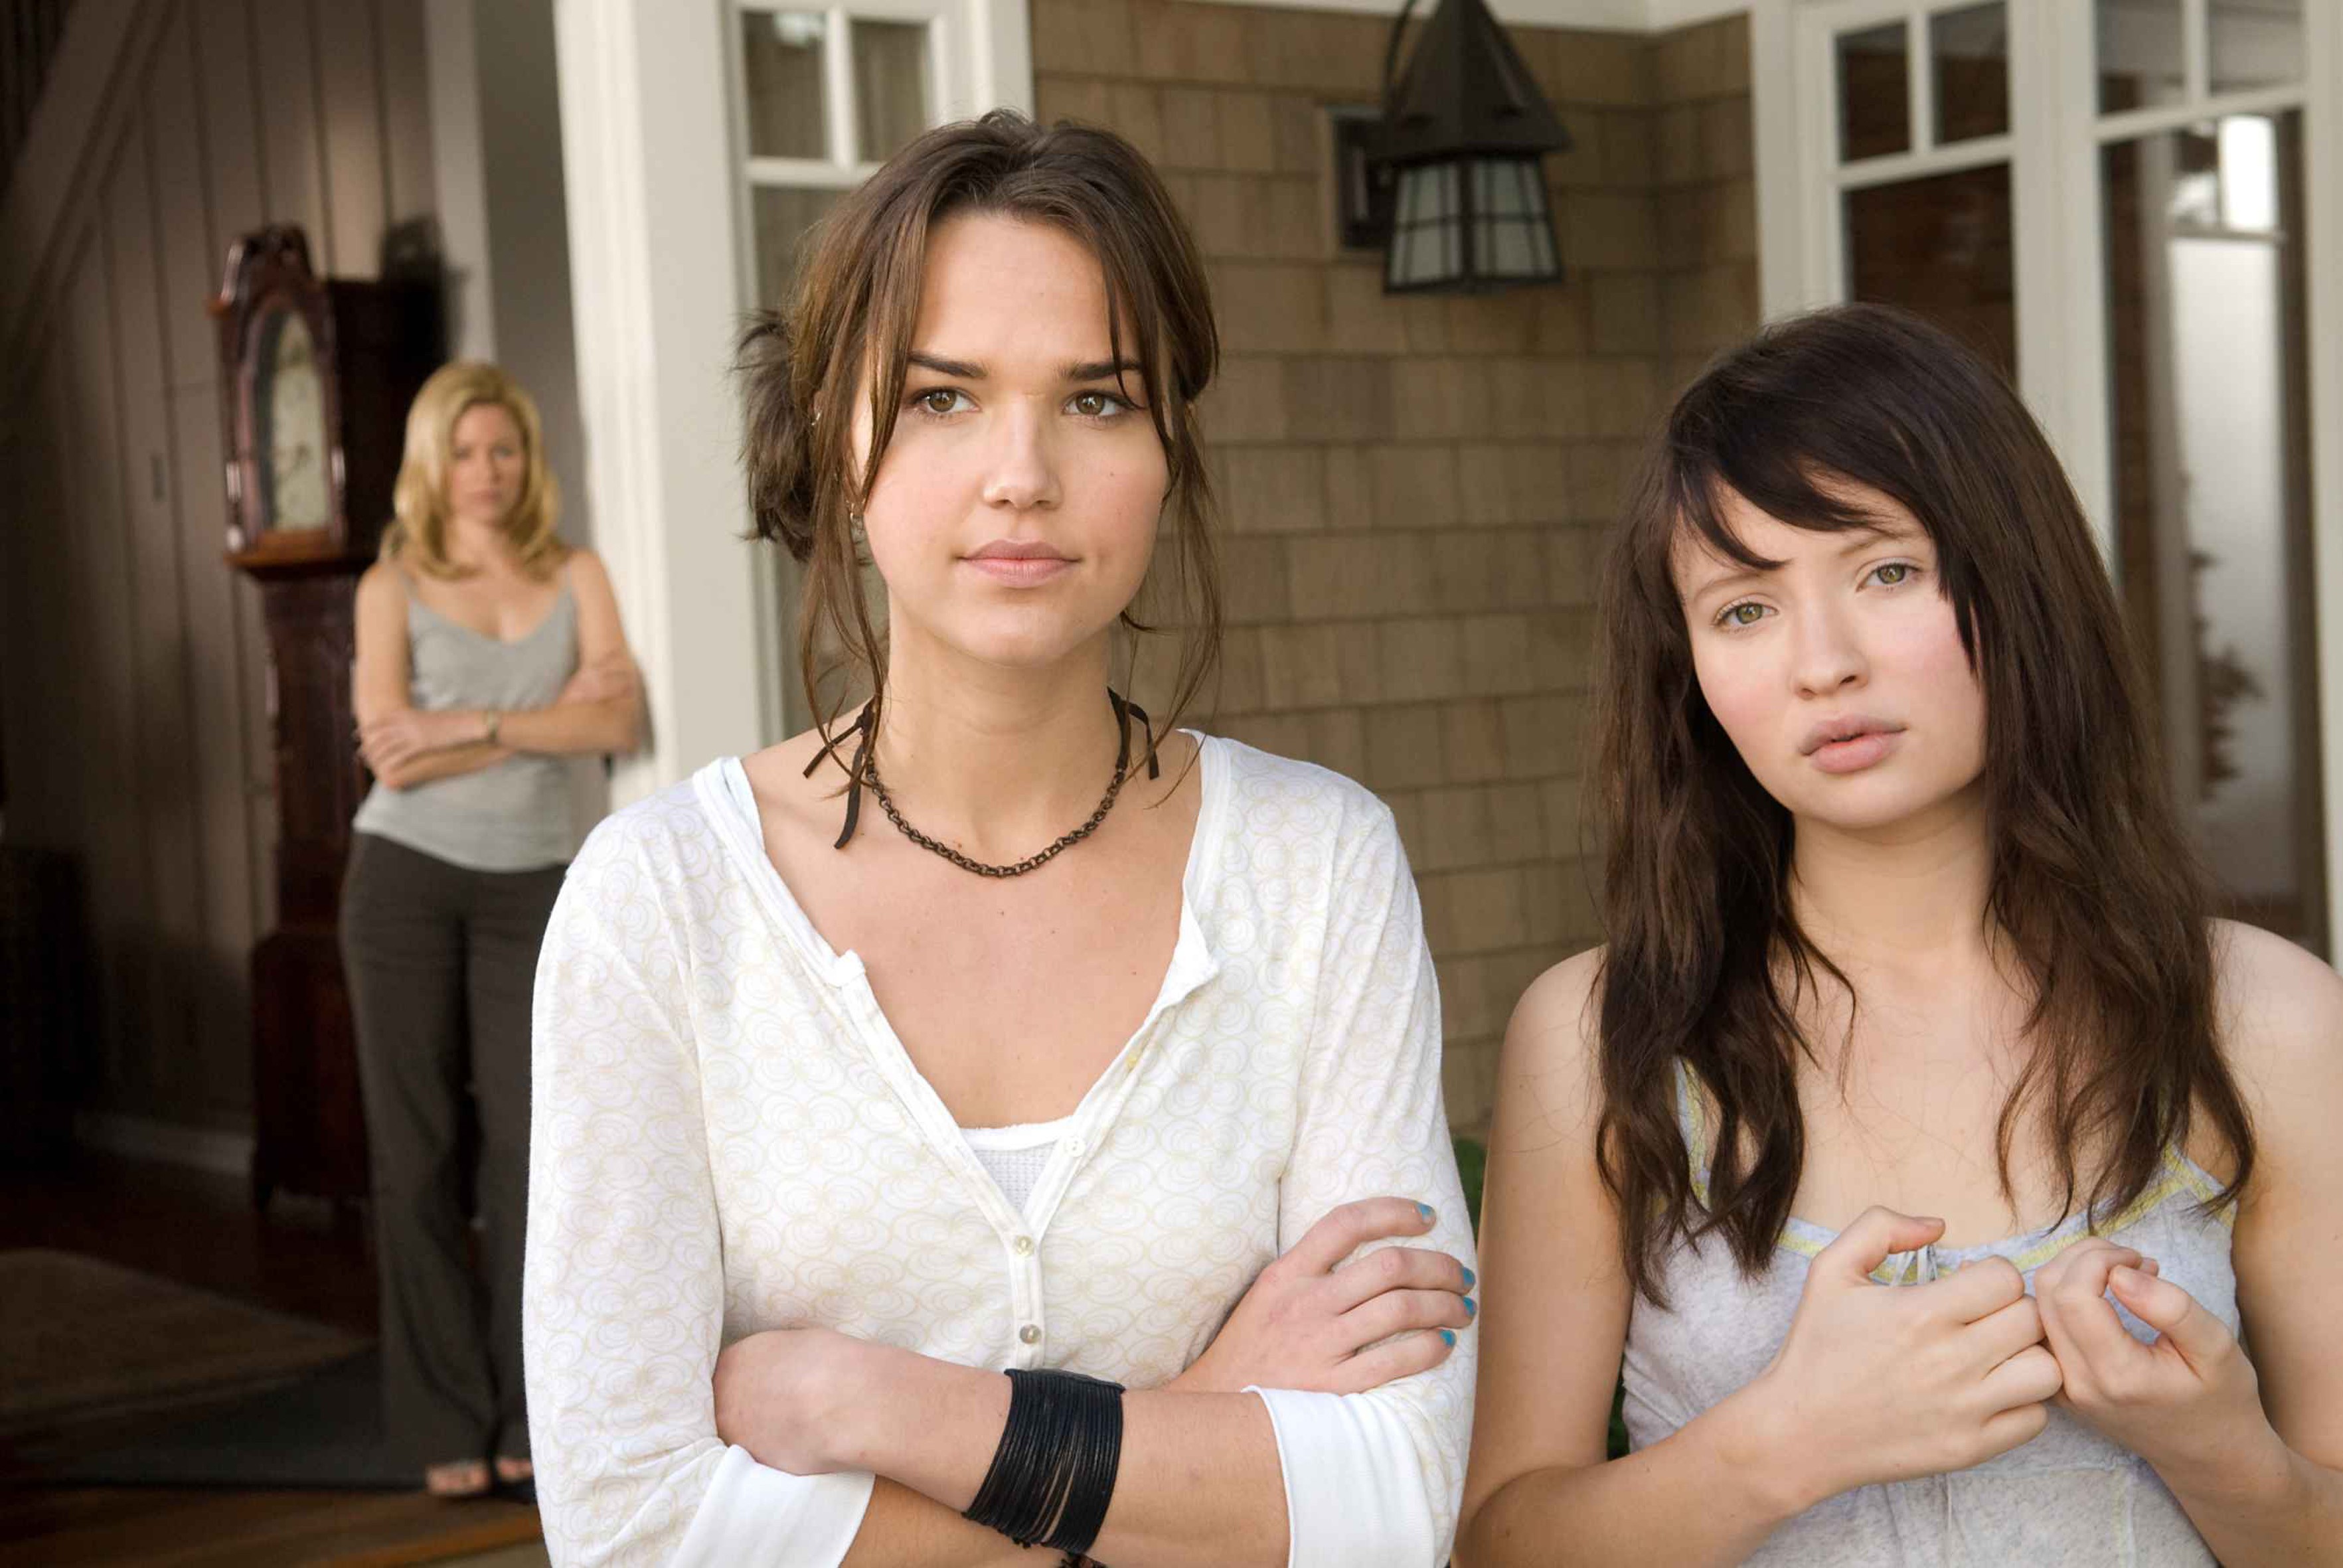 Sisters (l to r) Arielle Kebbel and Emily Browning while evil stepmother Elizabeth Banks lurks in the background in The Uninvited (2009)